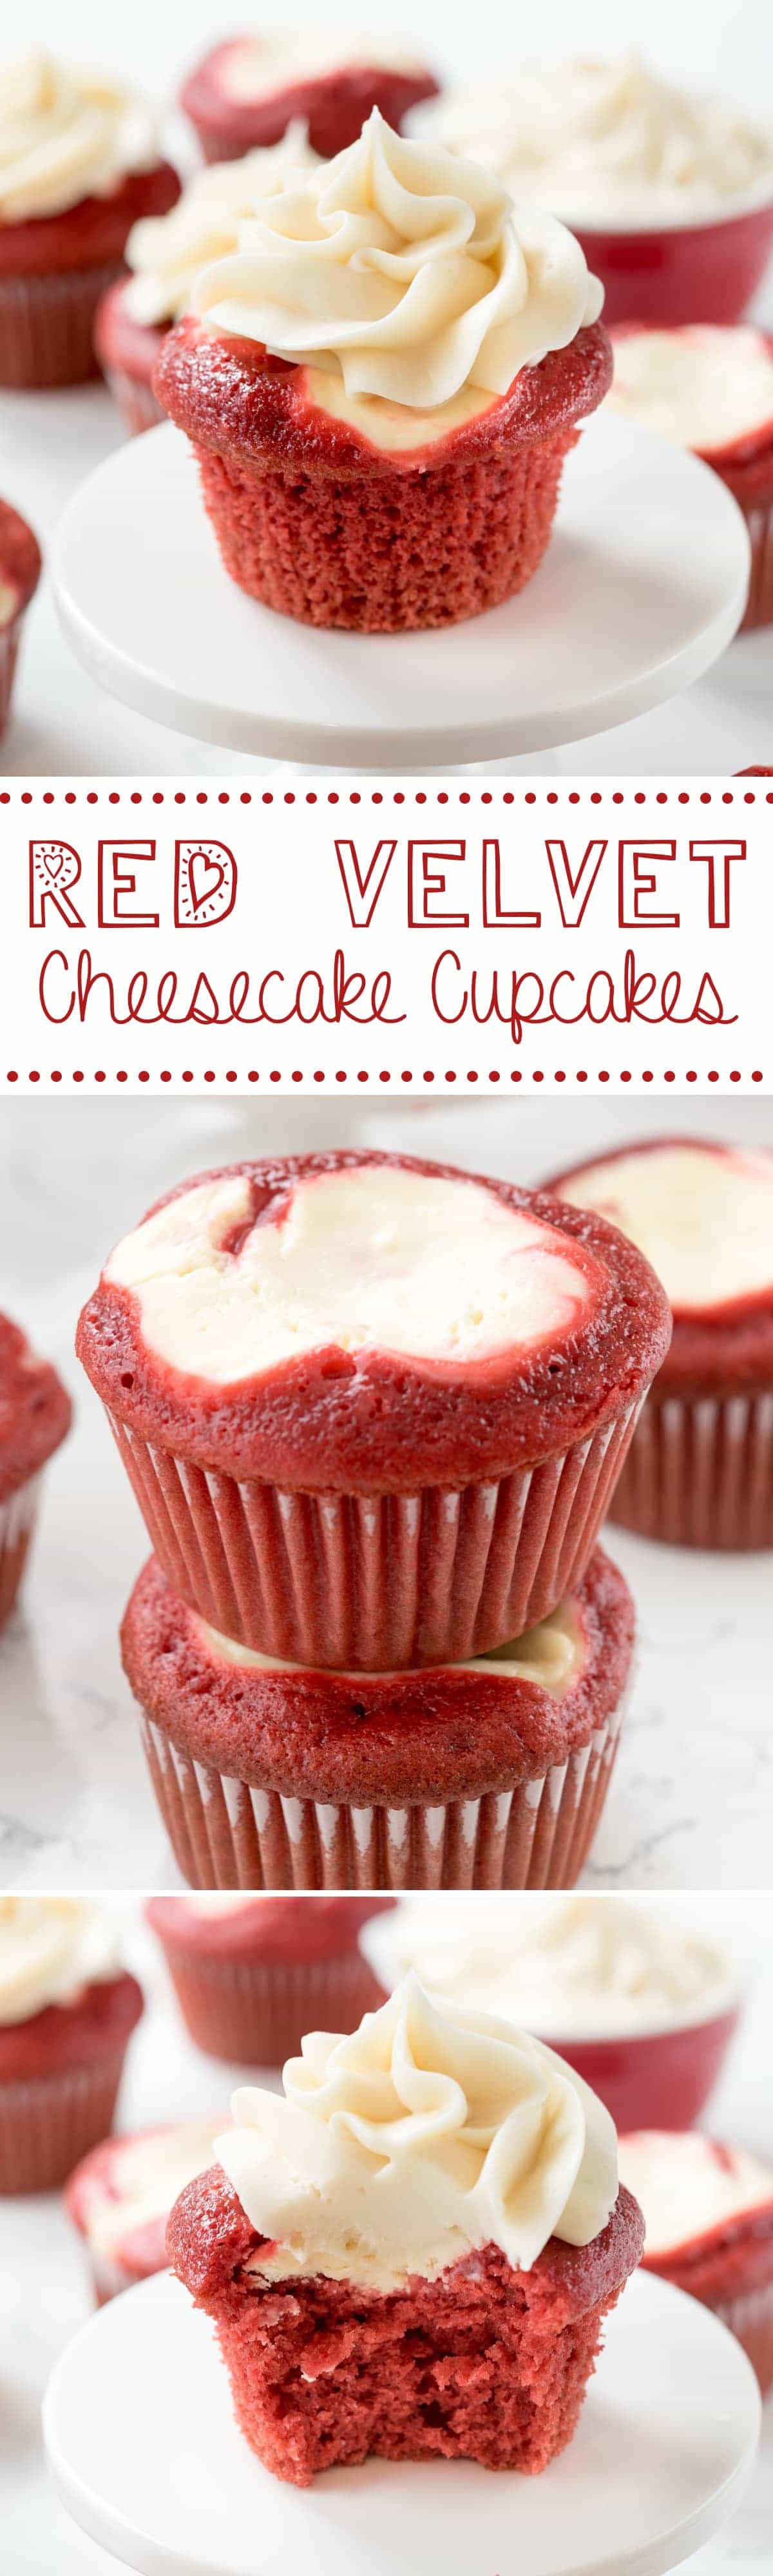 Red Velvet Cream Cheese Cupcakes - these easy cupcakes are completely from scratch. Red Velvet Cake filled with cheesecake and topped with cream cheese frosting - an amazing cupcake recipe!